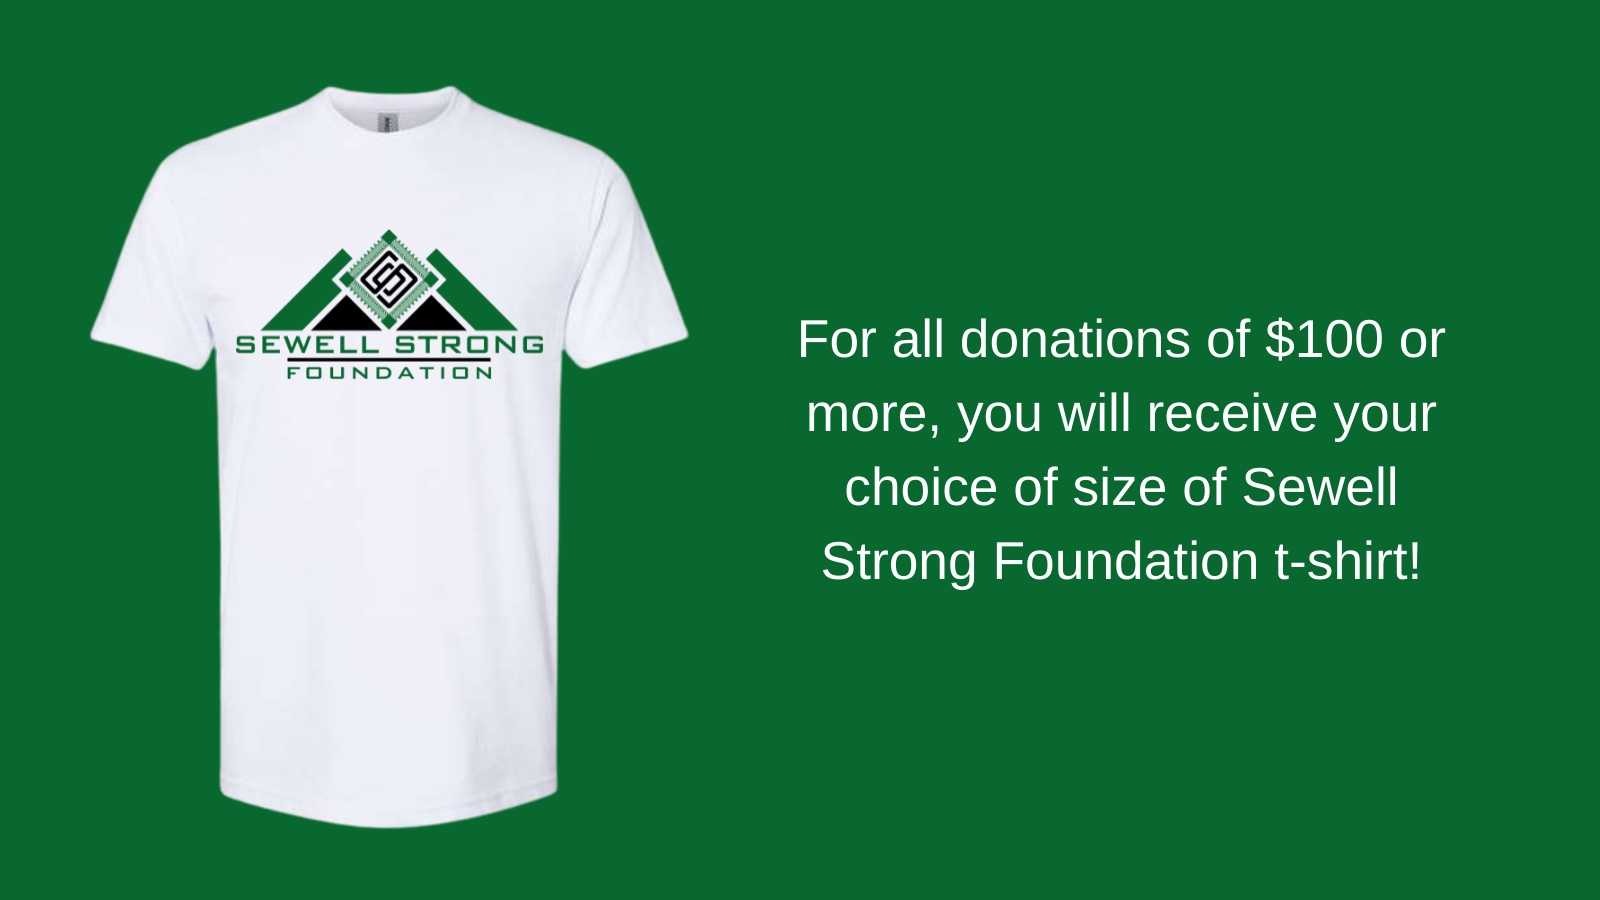 Get A Free T-Shirt when you donate $100 or more